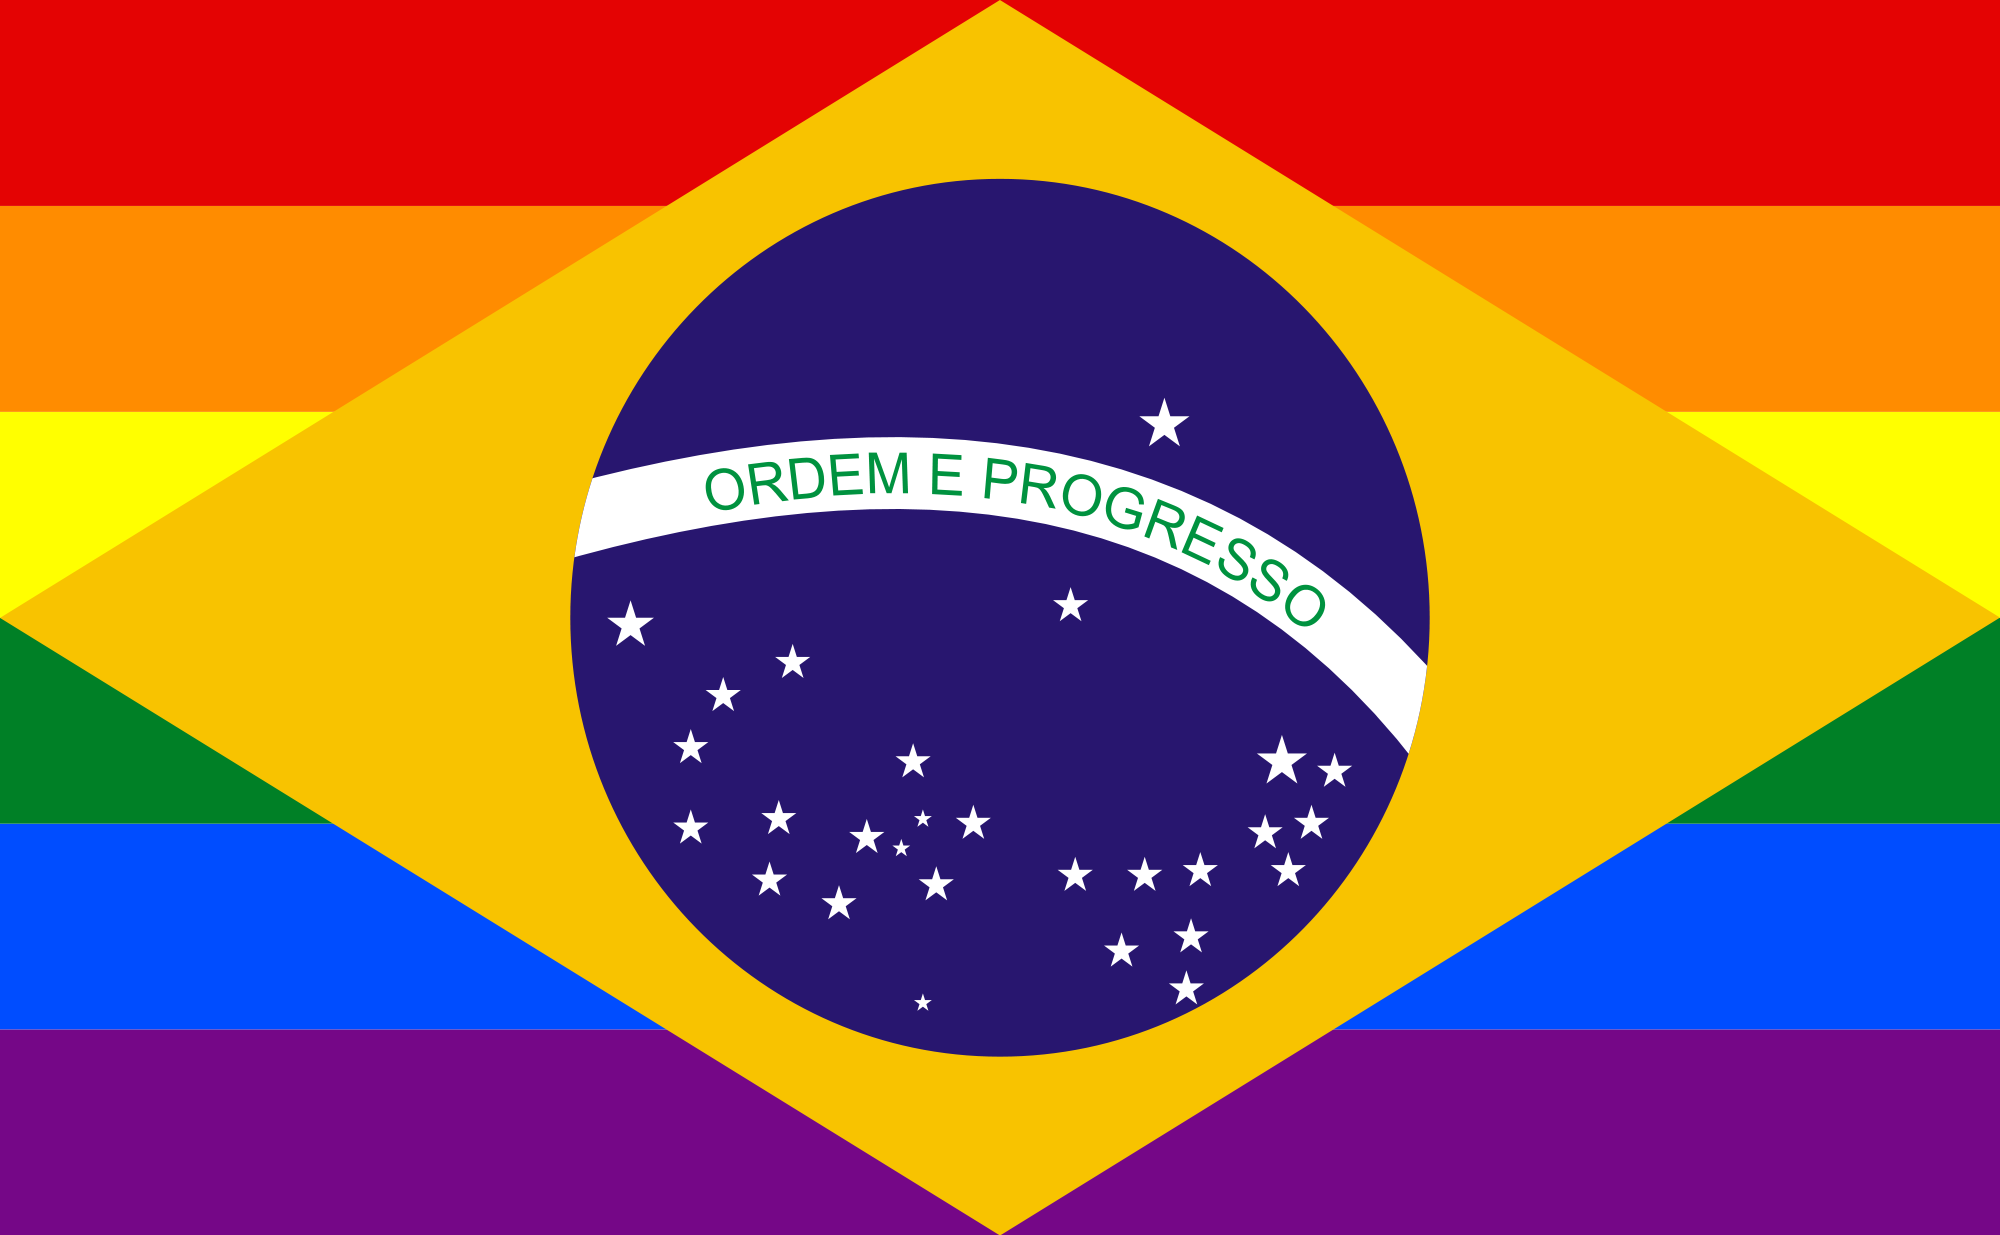 Brazil celebrates signing of National Pact Against LGBTphobic Violence